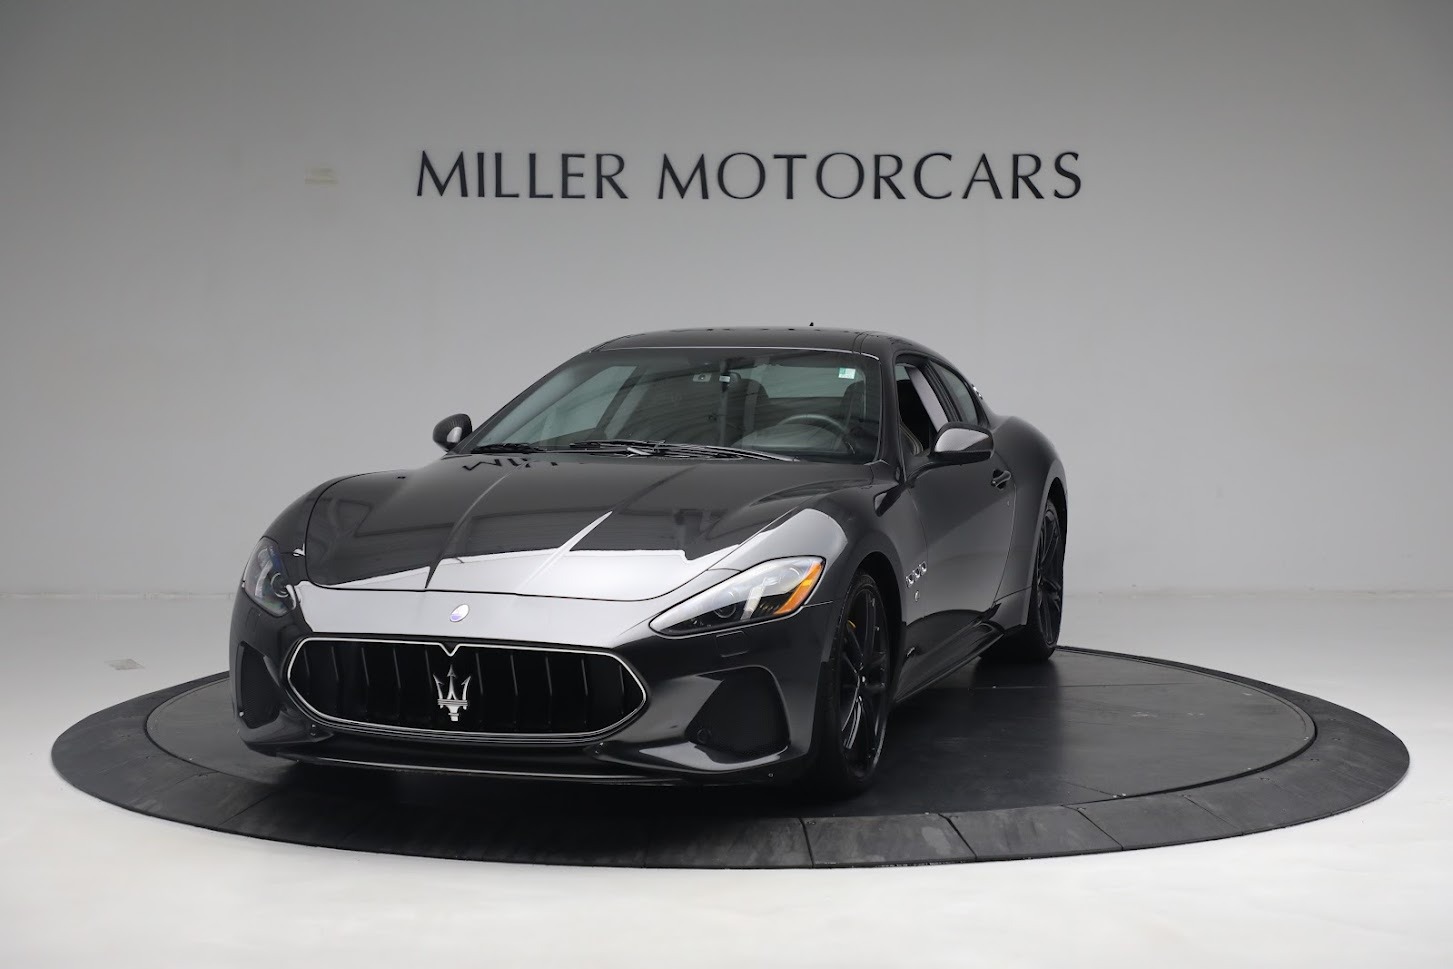 Used 2018 Maserati GranTurismo Sport for sale Sold at Bentley Greenwich in Greenwich CT 06830 1